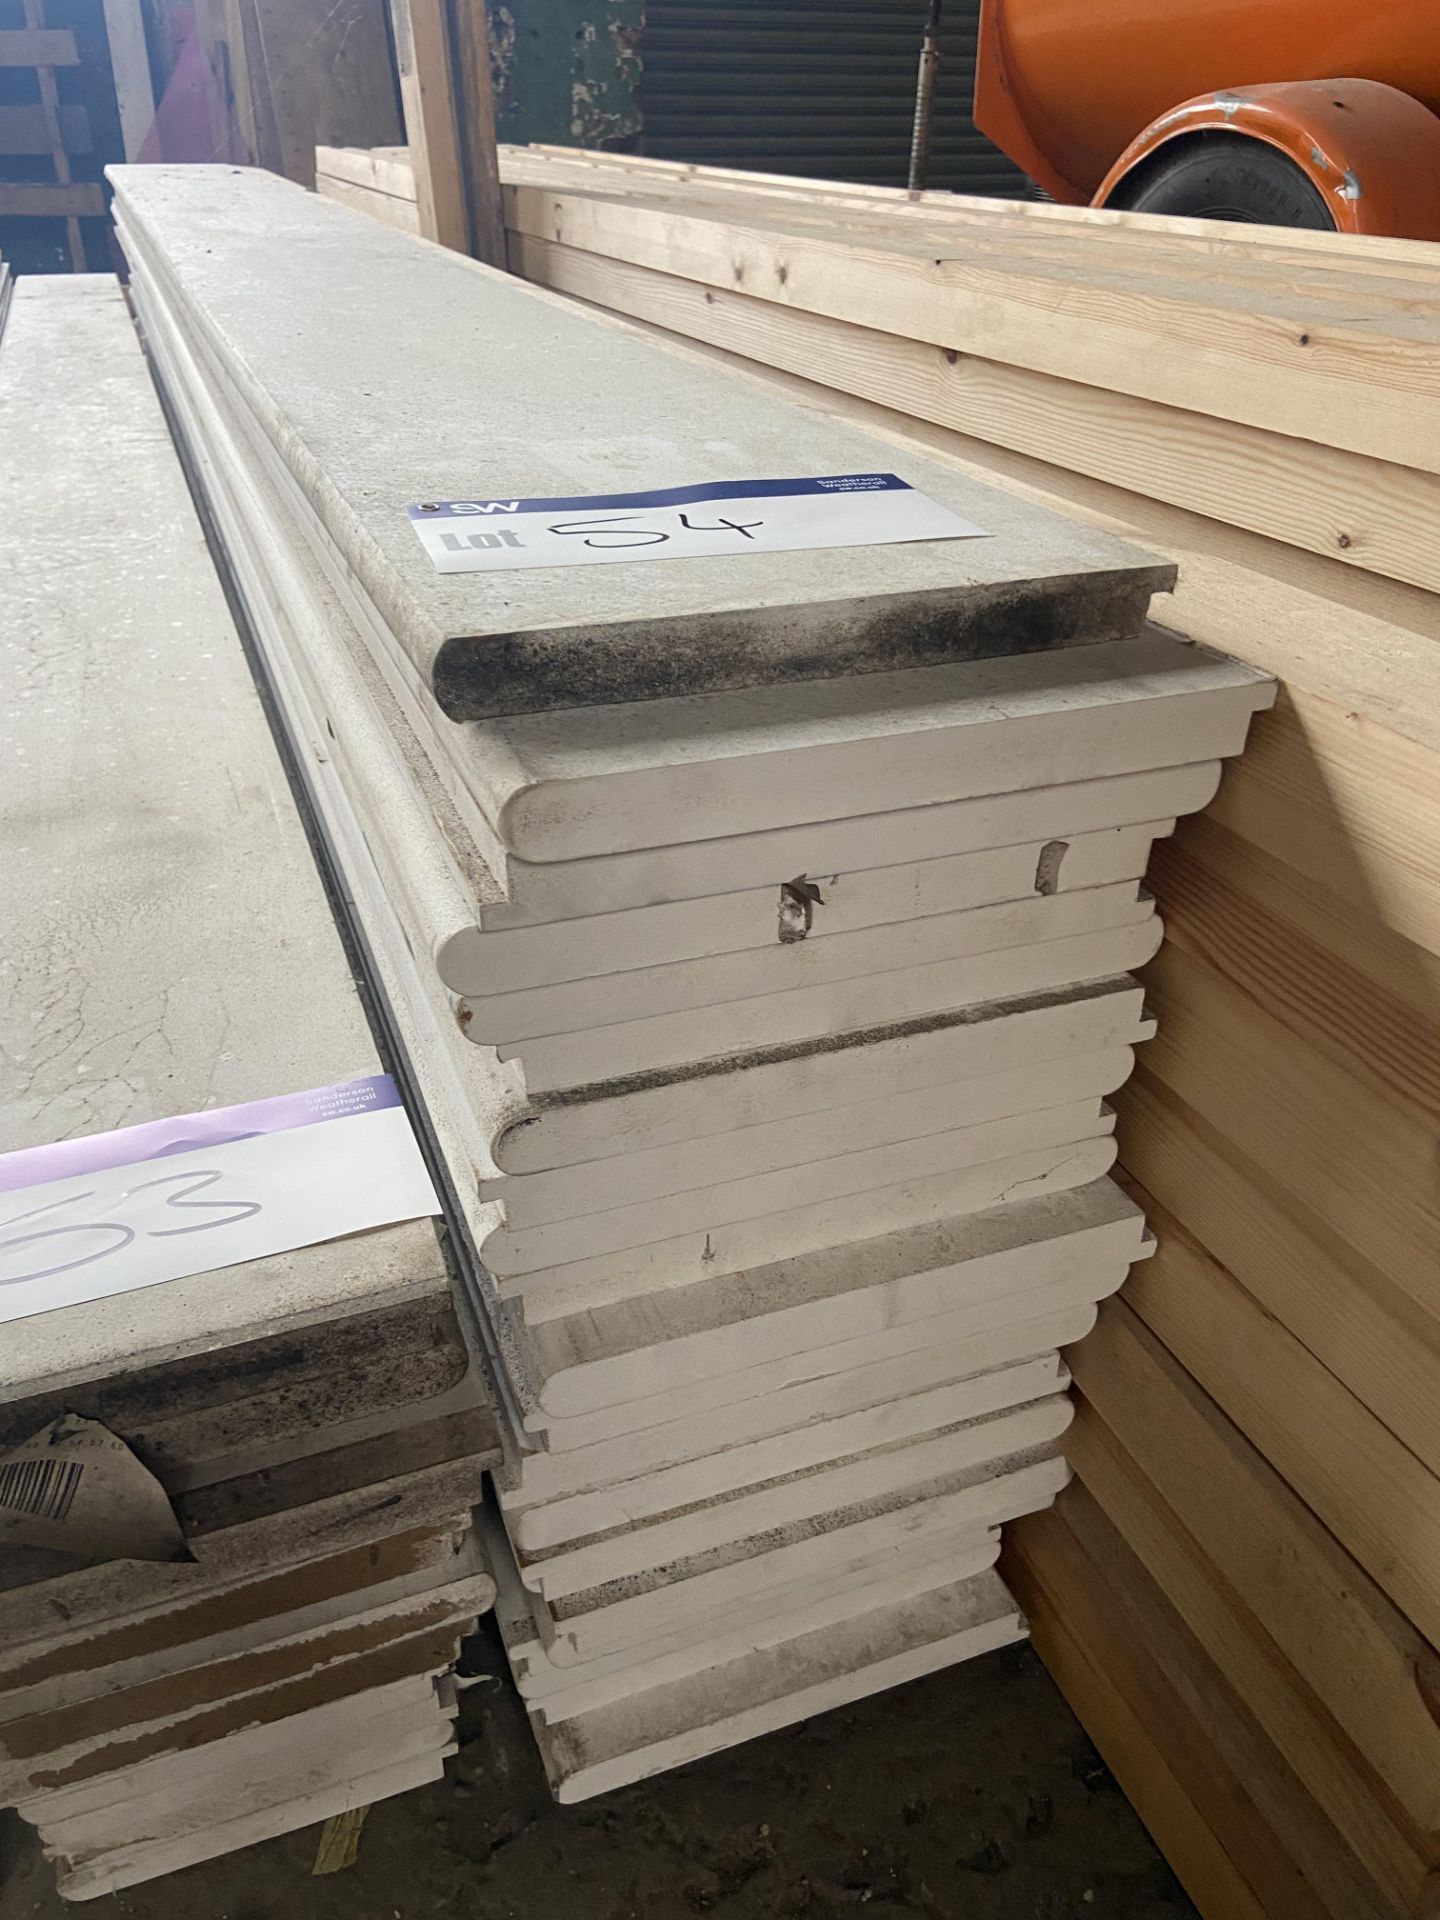 Approx. 24 Lengths of MDF Primed Bull Nose Window Boards, each approx. 270mm x 22mm x 3.65m long, as